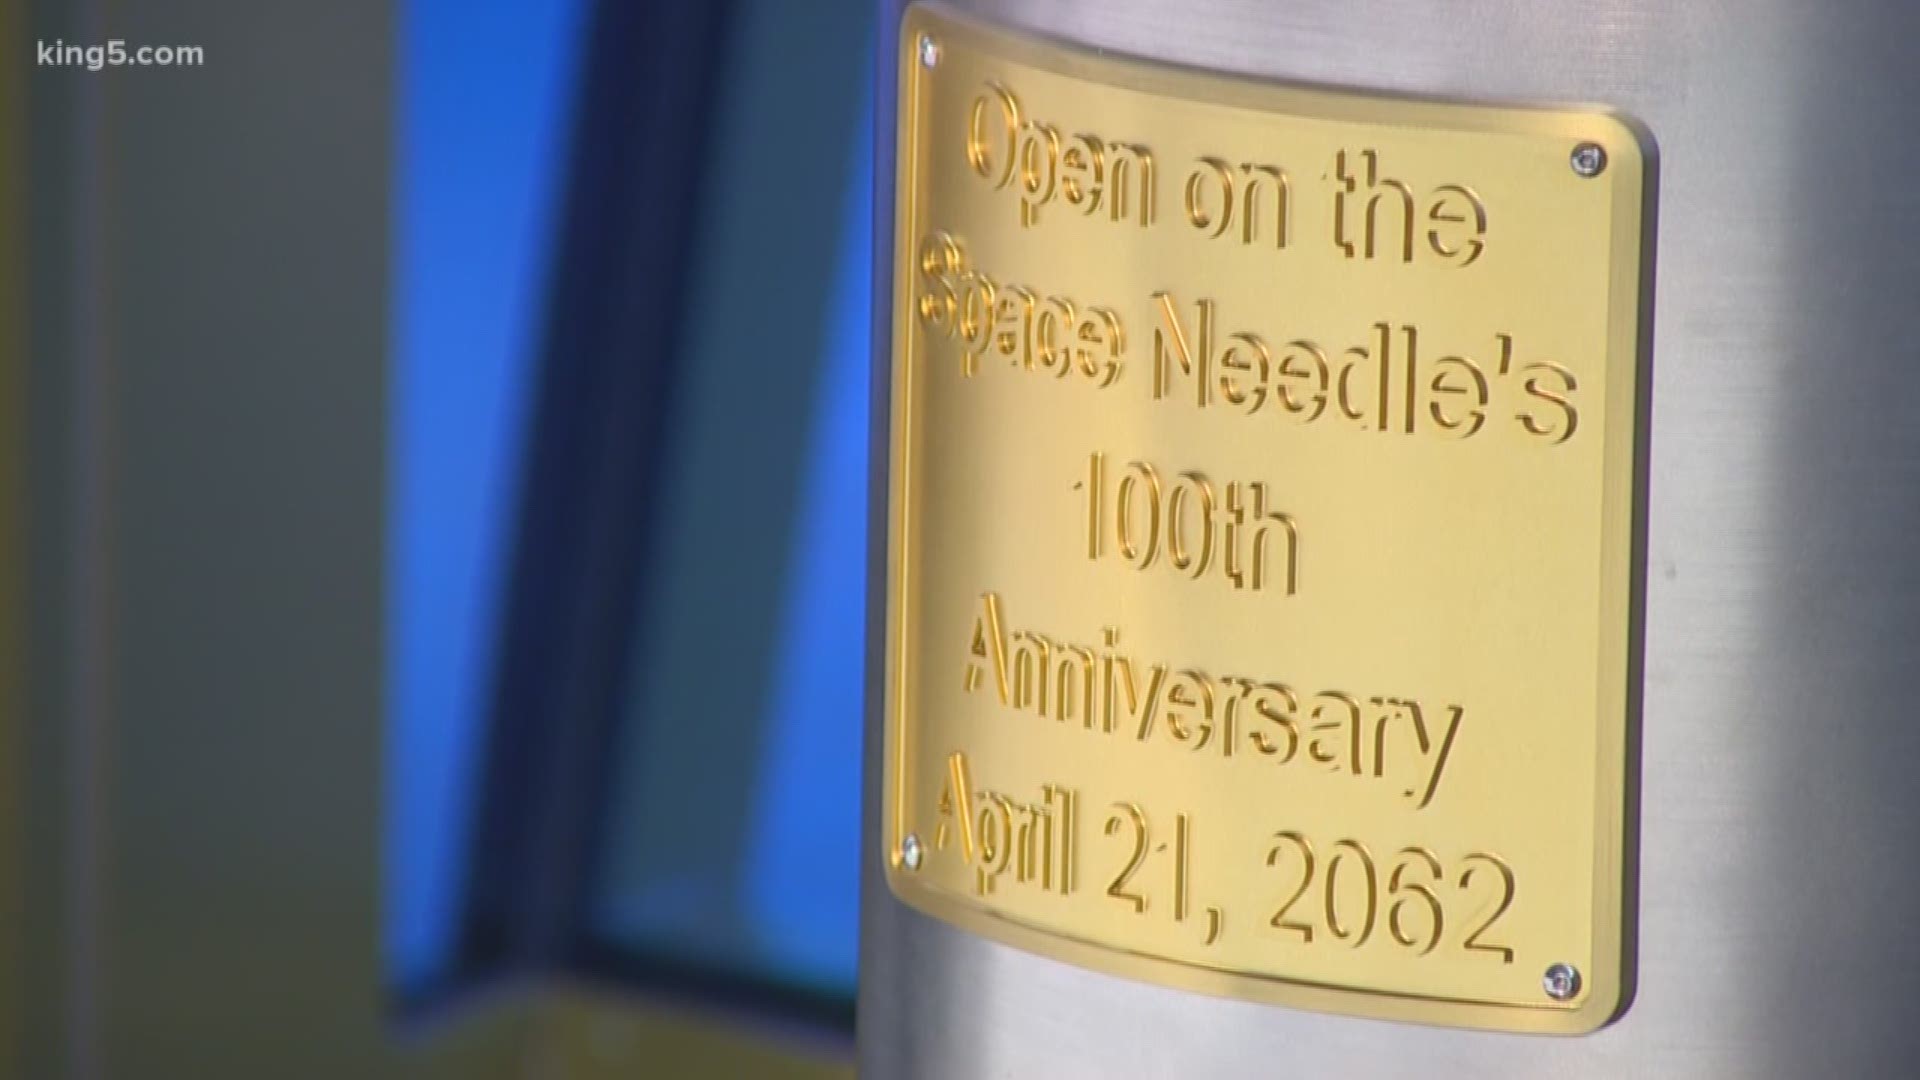 Needle seals Seattle time capsule to be opened in 2062 | king5.com